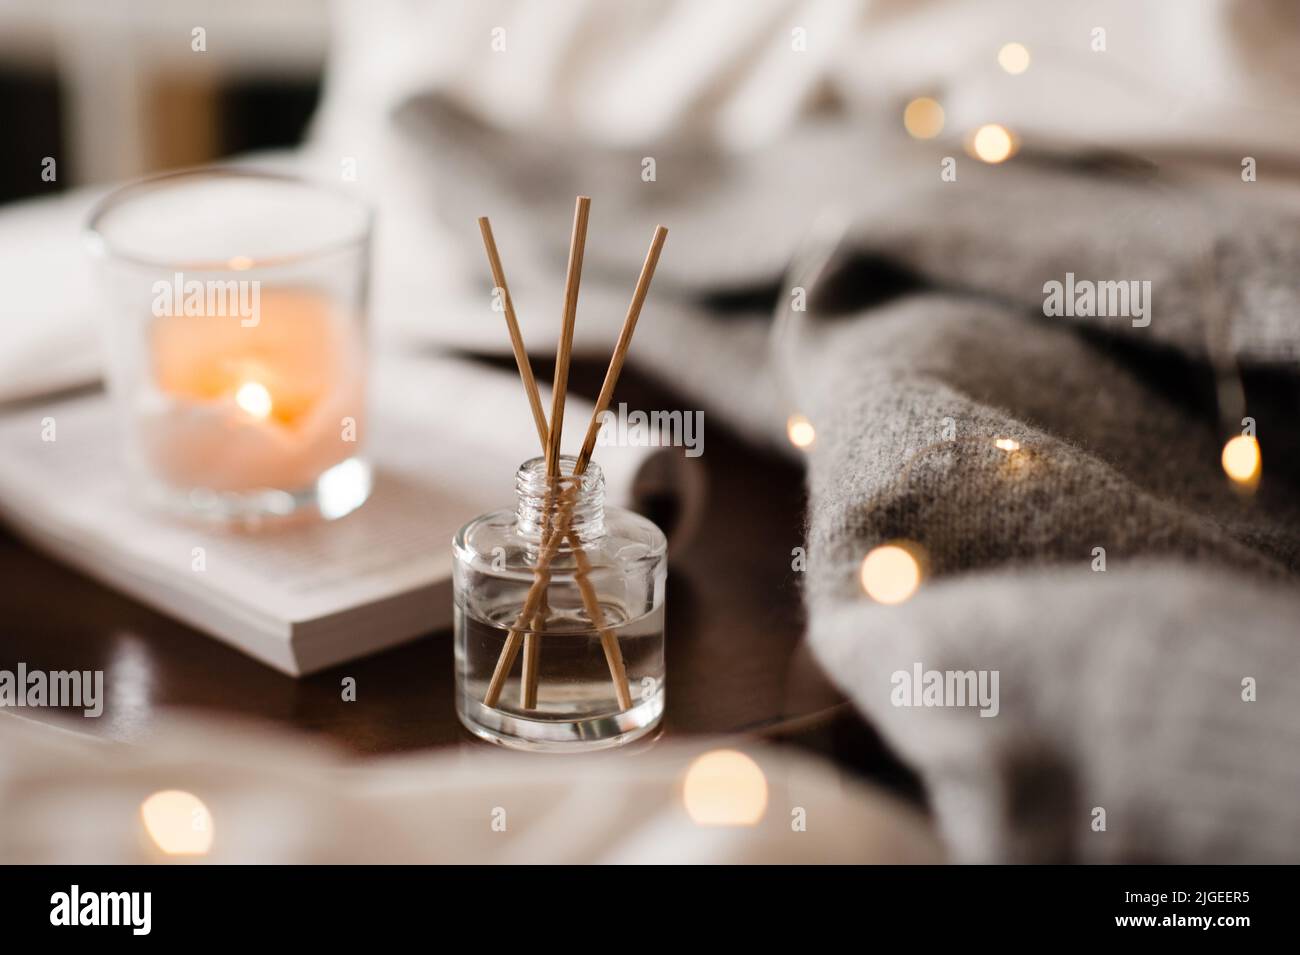 Home liquid fragrance on open paper book and burning scented candle on wooden tray and knit cloth sweater in bed close up. Cozy atmosphere. Stock Photo